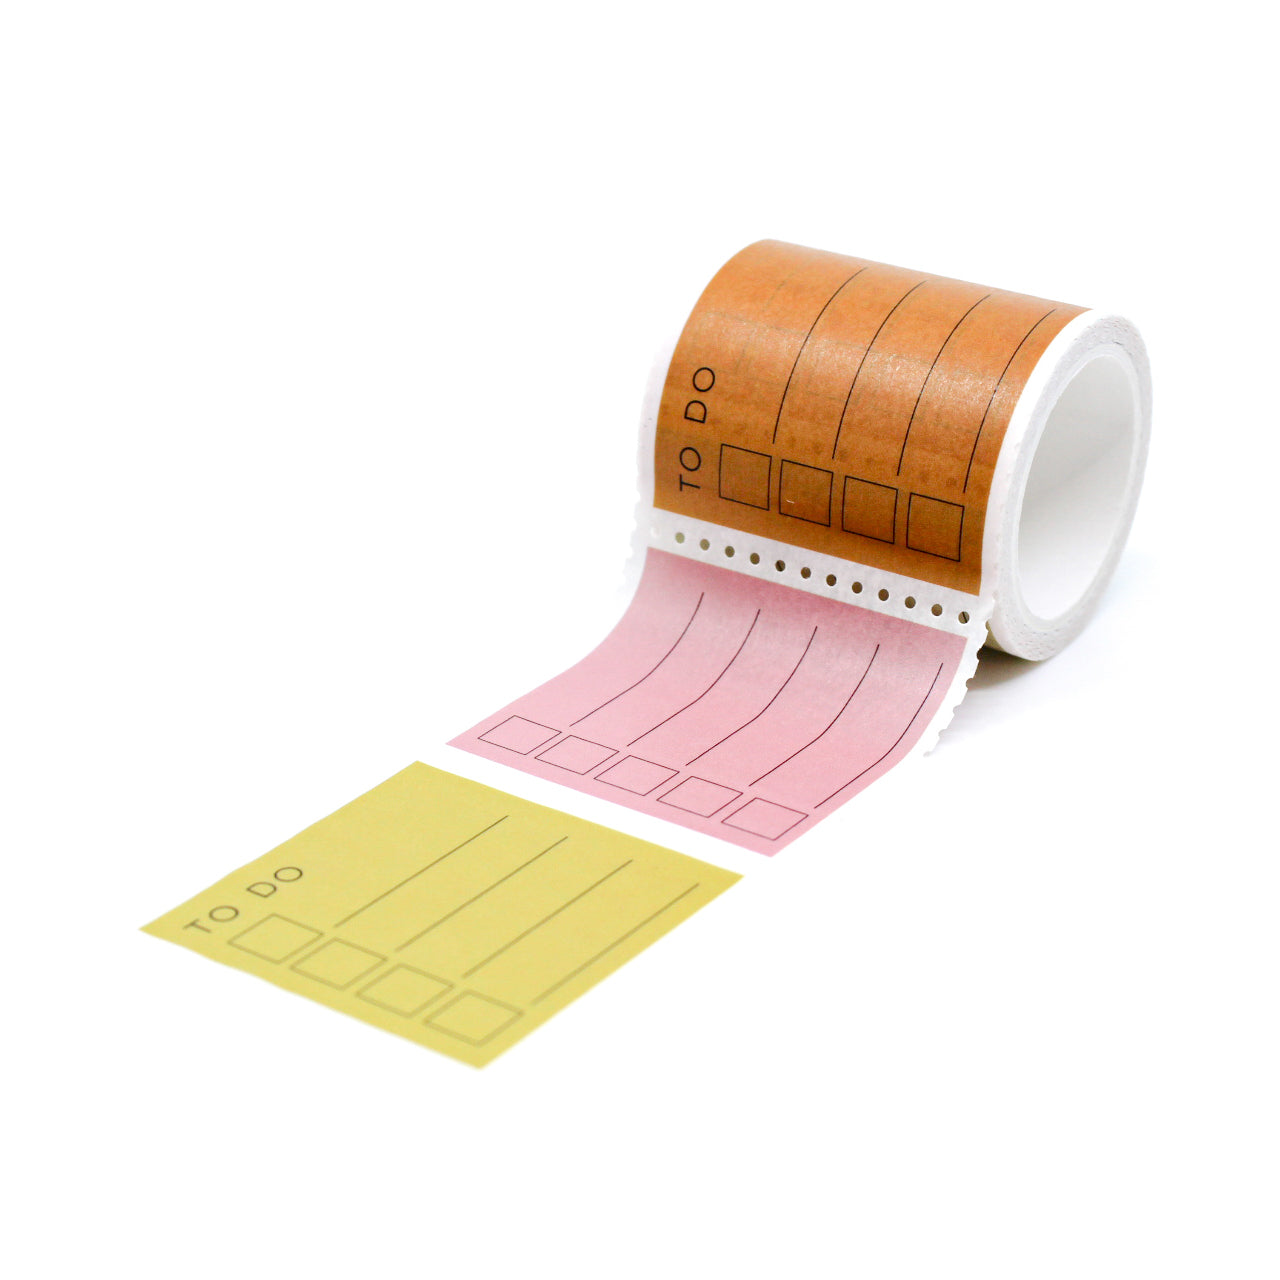 Stay organized with To-Do List Washi Tape Stamps, a practical tool for adding task lists to your planner or journal. Ideal for a functional and visually appealing way to manage your tasks. This tape is from The Completist and sold at BBB Supplies Craft Shop.